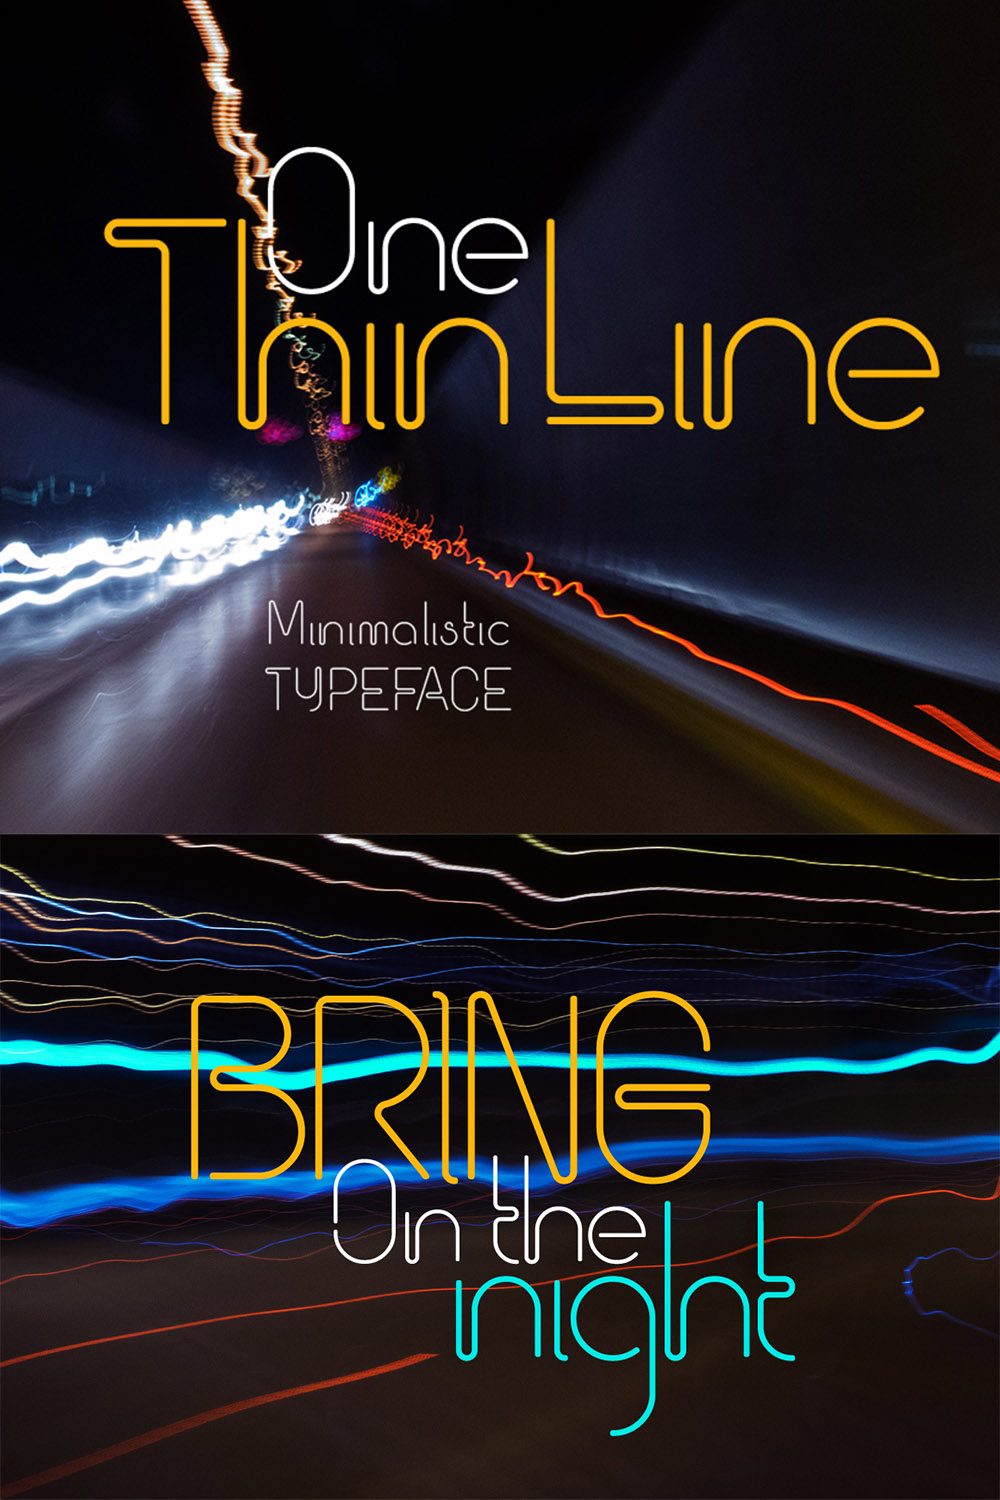 Images with text showcasing the colorful One Thin Line font.